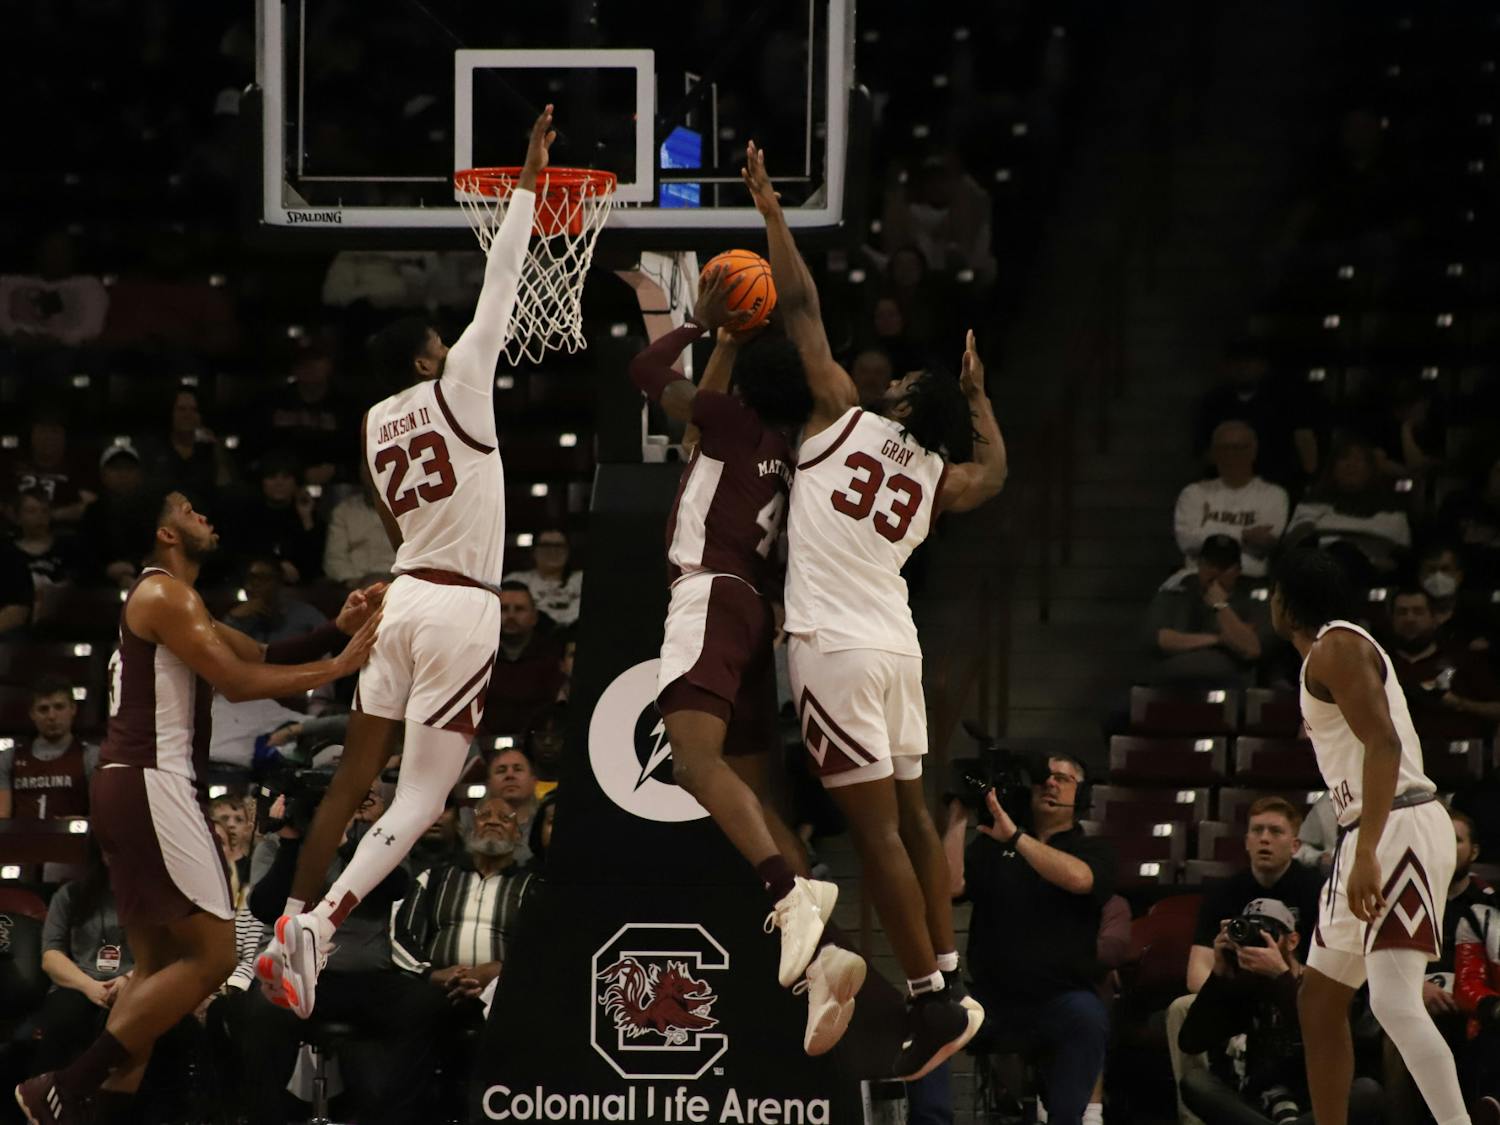 Freshman forward Gregory “GG” Jackson II and junior forward Josh Gray soar through the air to try to block Mississippi State's shot on the basket. This game was held in the Colonial Life Arena on Jan. 31, 2023. The South Carolina Gamecocks lost 66-51.